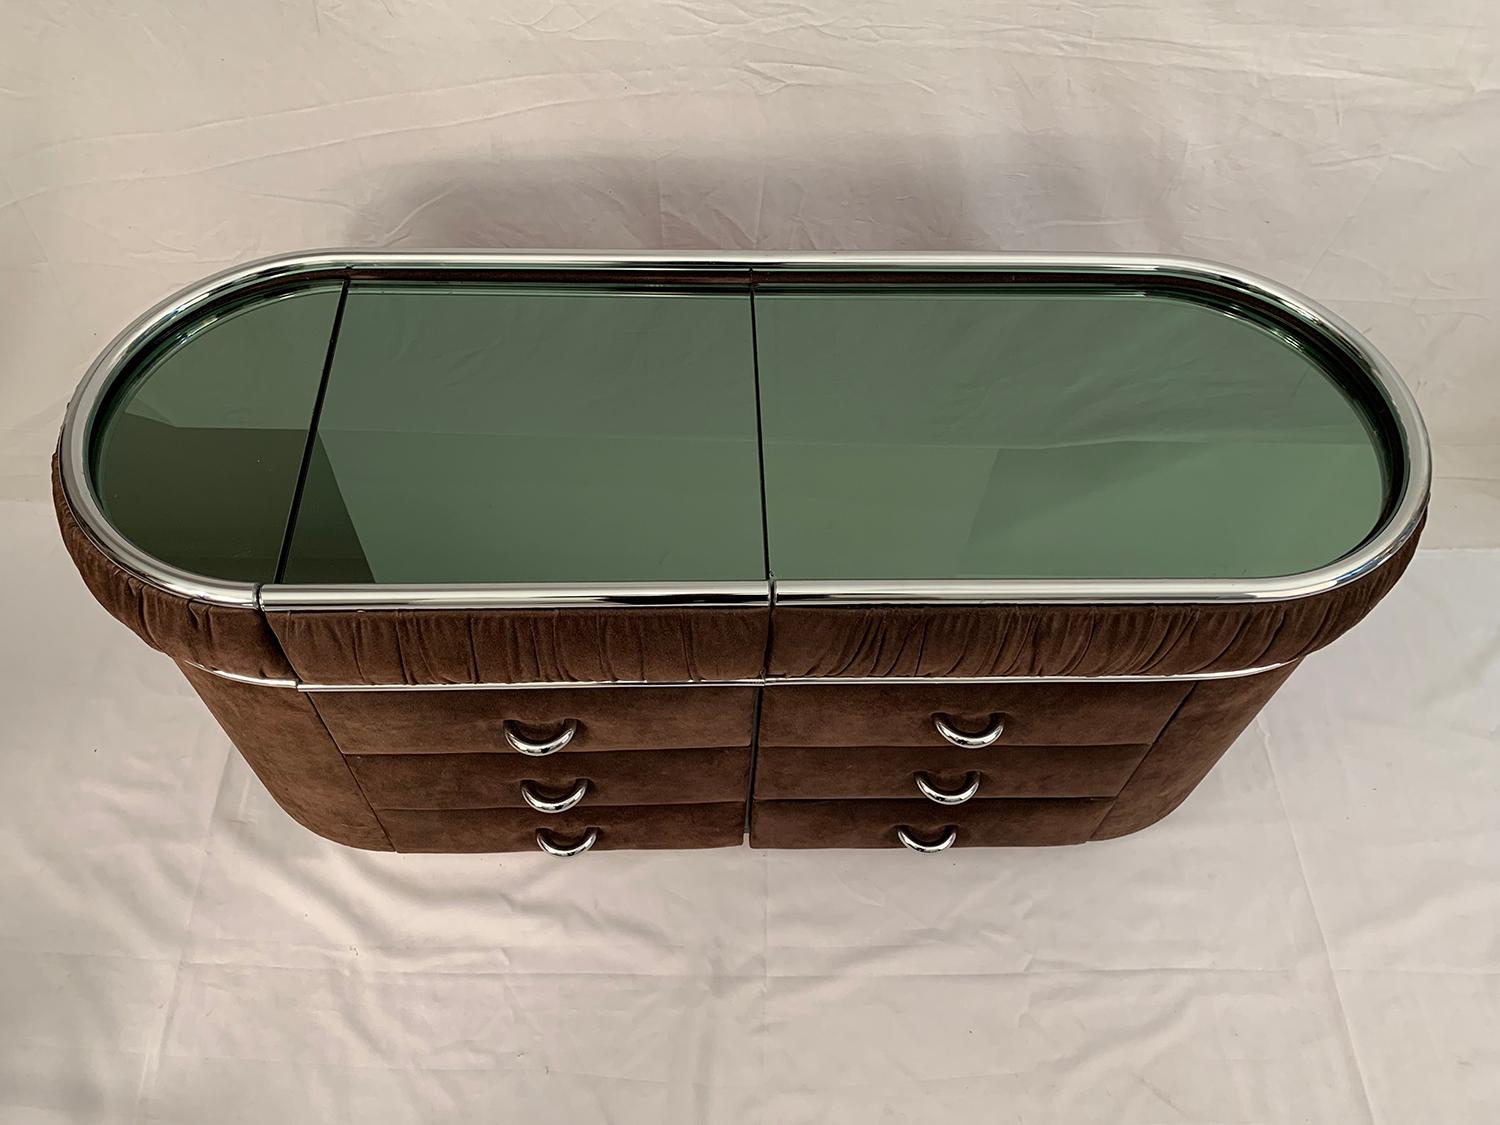 Very nice vanity cabinet covered with brown suede. Handles and contour are made of chrome. A mirror with light green reflects embellishes the top of the cabinet, 1970s.

Très joli meuble coiffeuse en daim marron avec poignée et contour en chrome